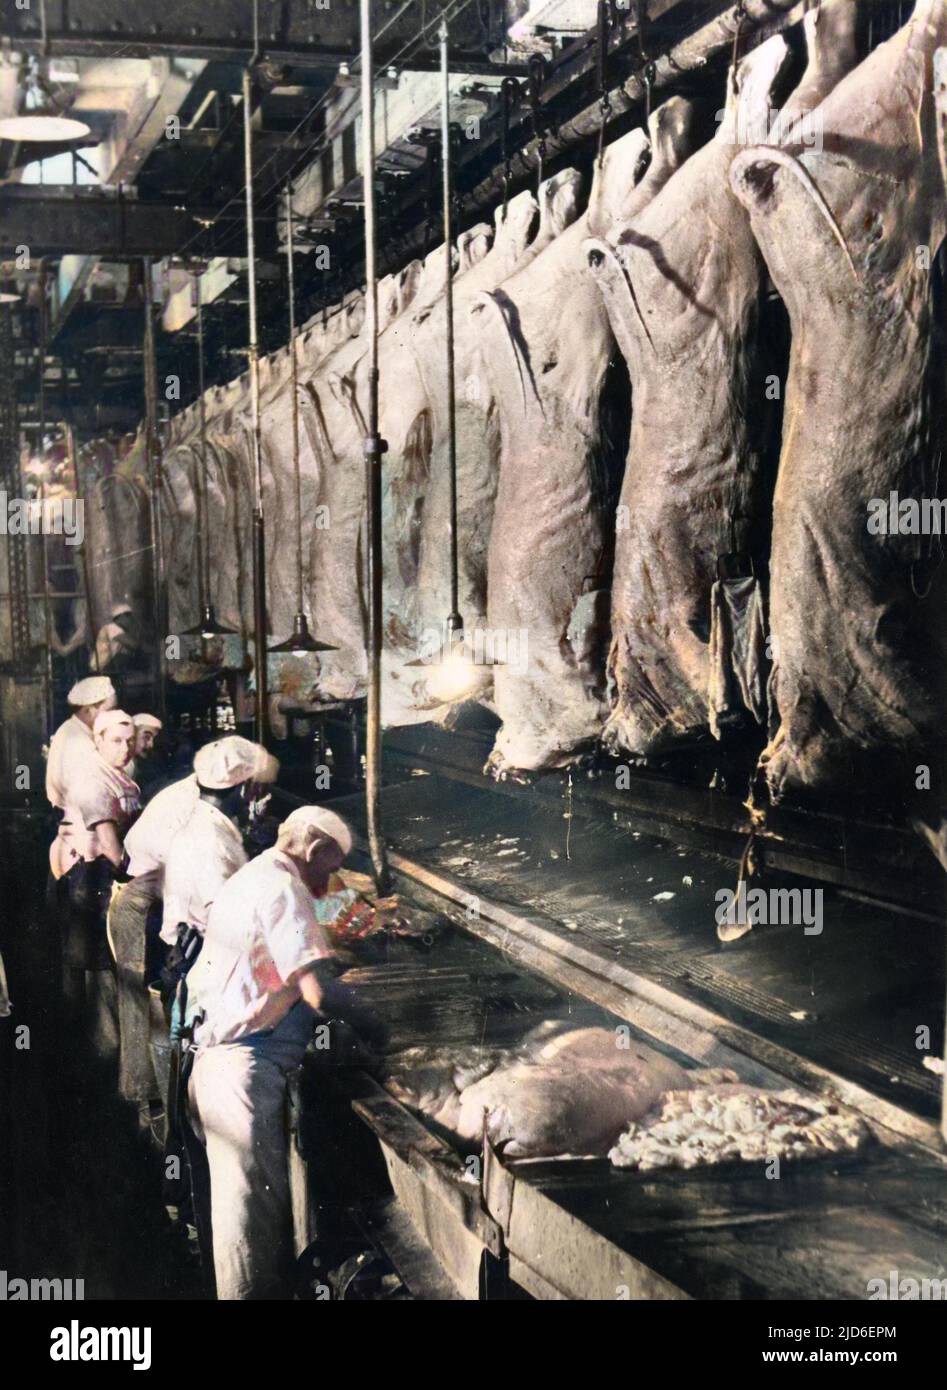 Butchers removing intestines from cattle carcasses, part of the Argentinian meat (beef) production process. Colourised version of : 10157040       Date: 1930s Stock Photo